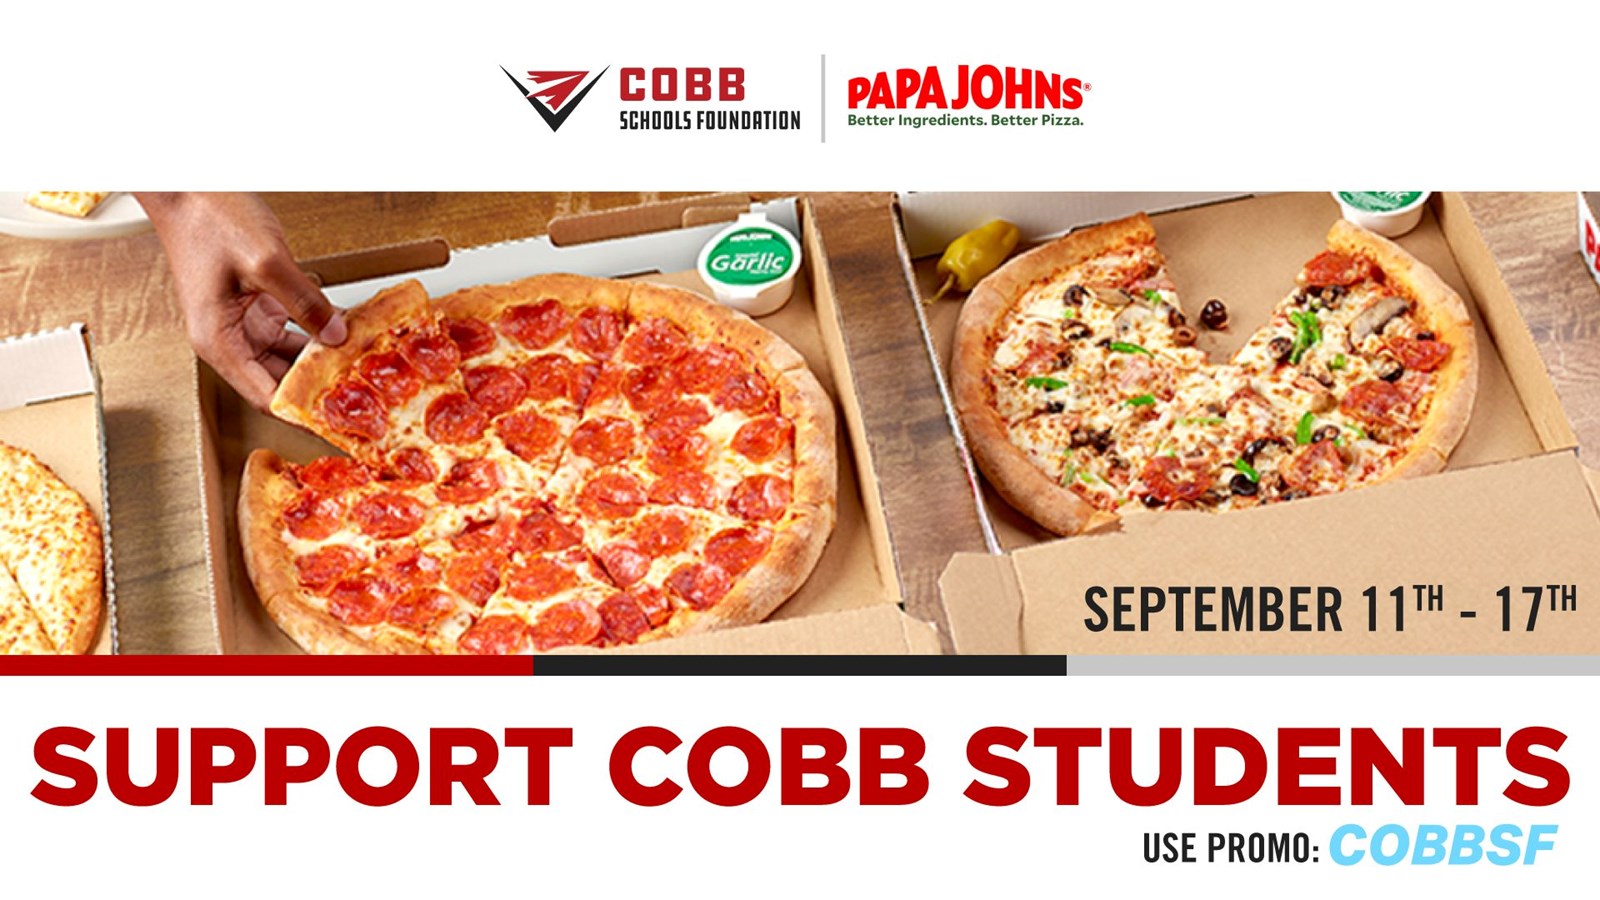 Cobb Schools Foundation partners with Papa Johns